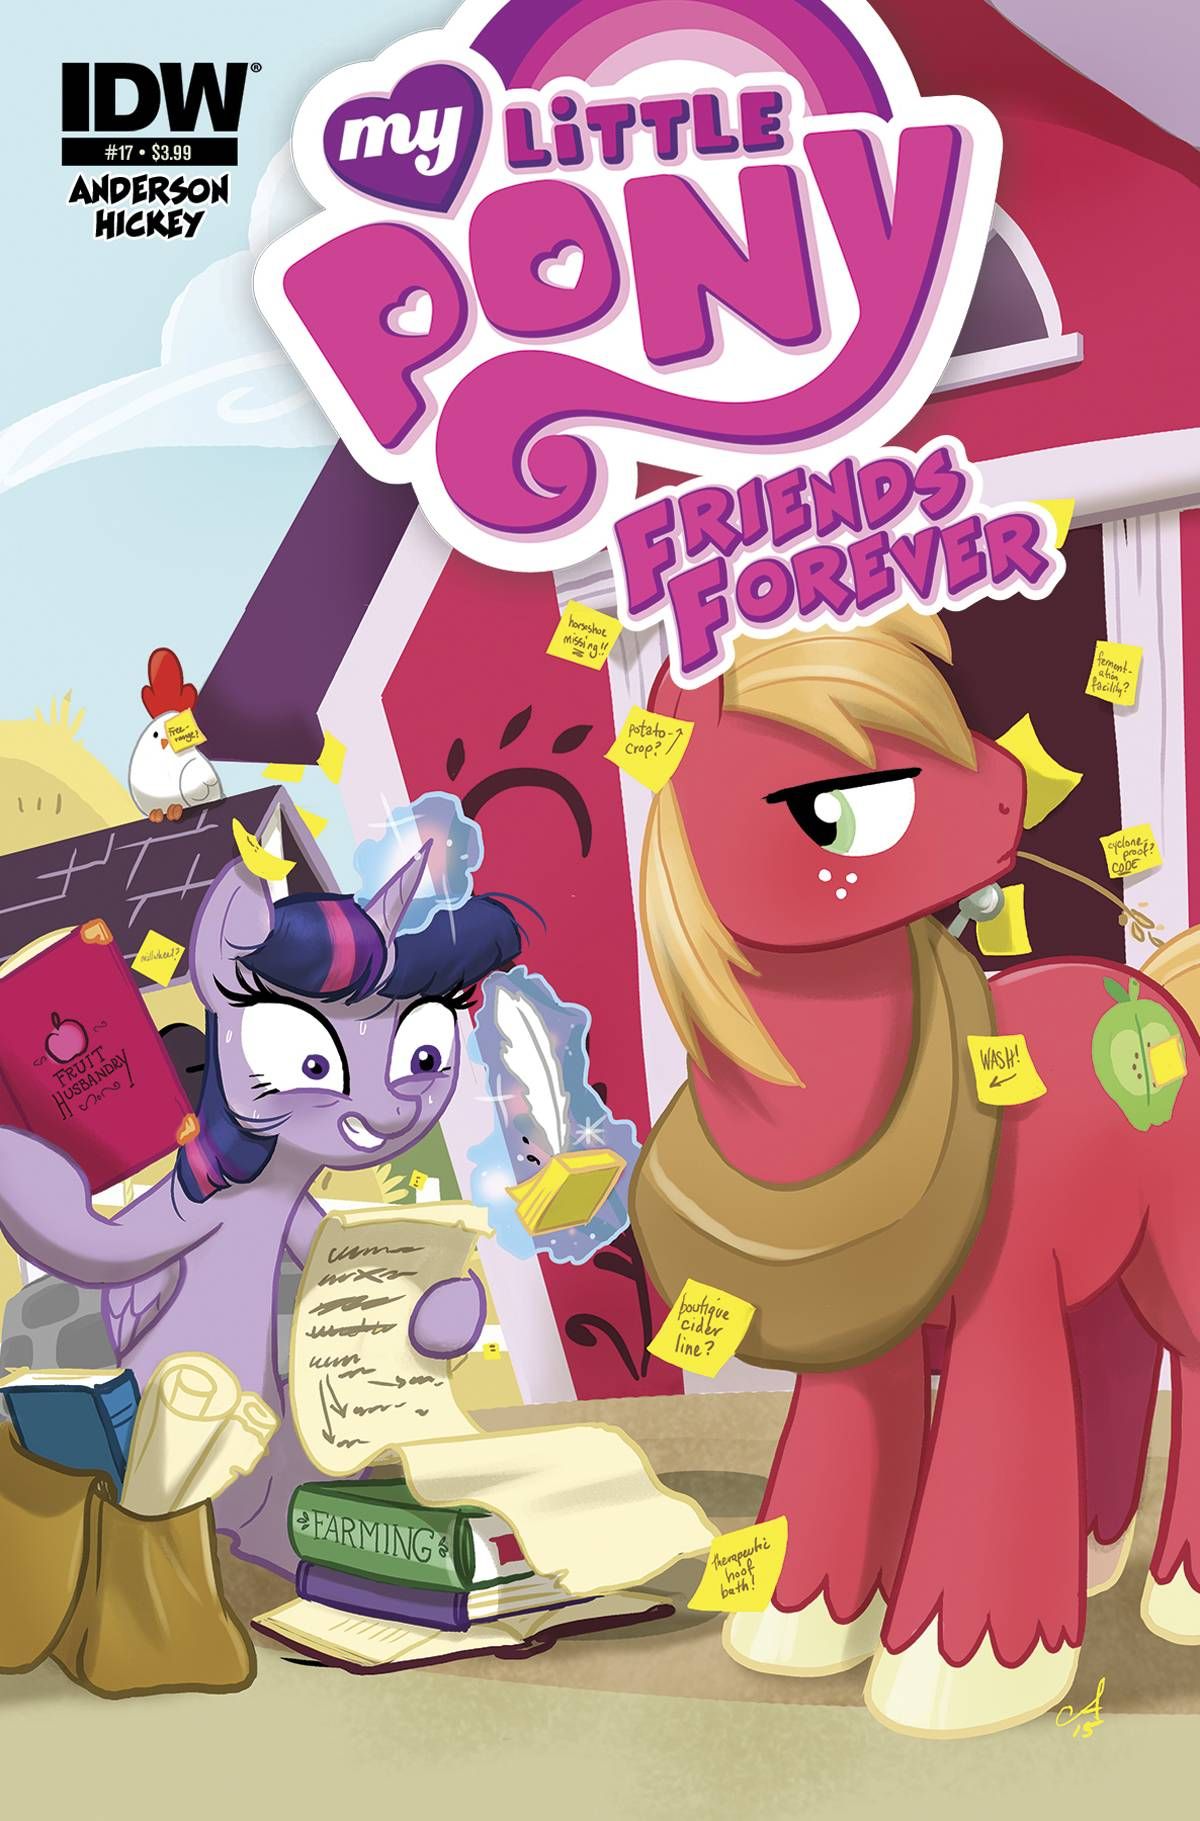 My Little Pony Friends Forever #17 Comic